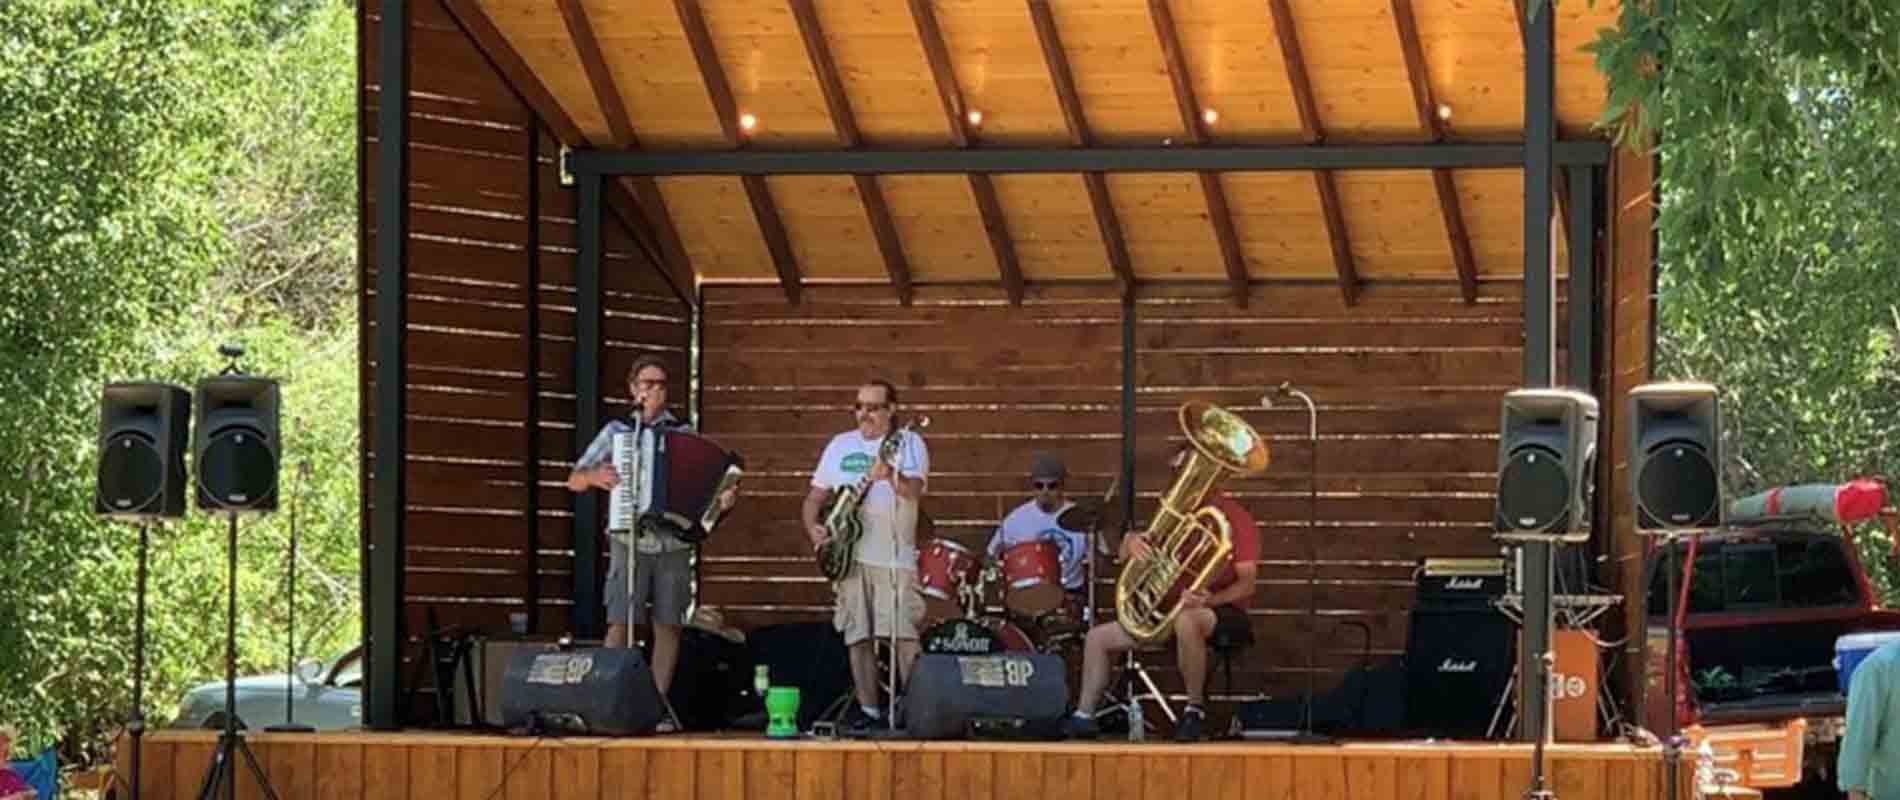 Music at Discovery Park